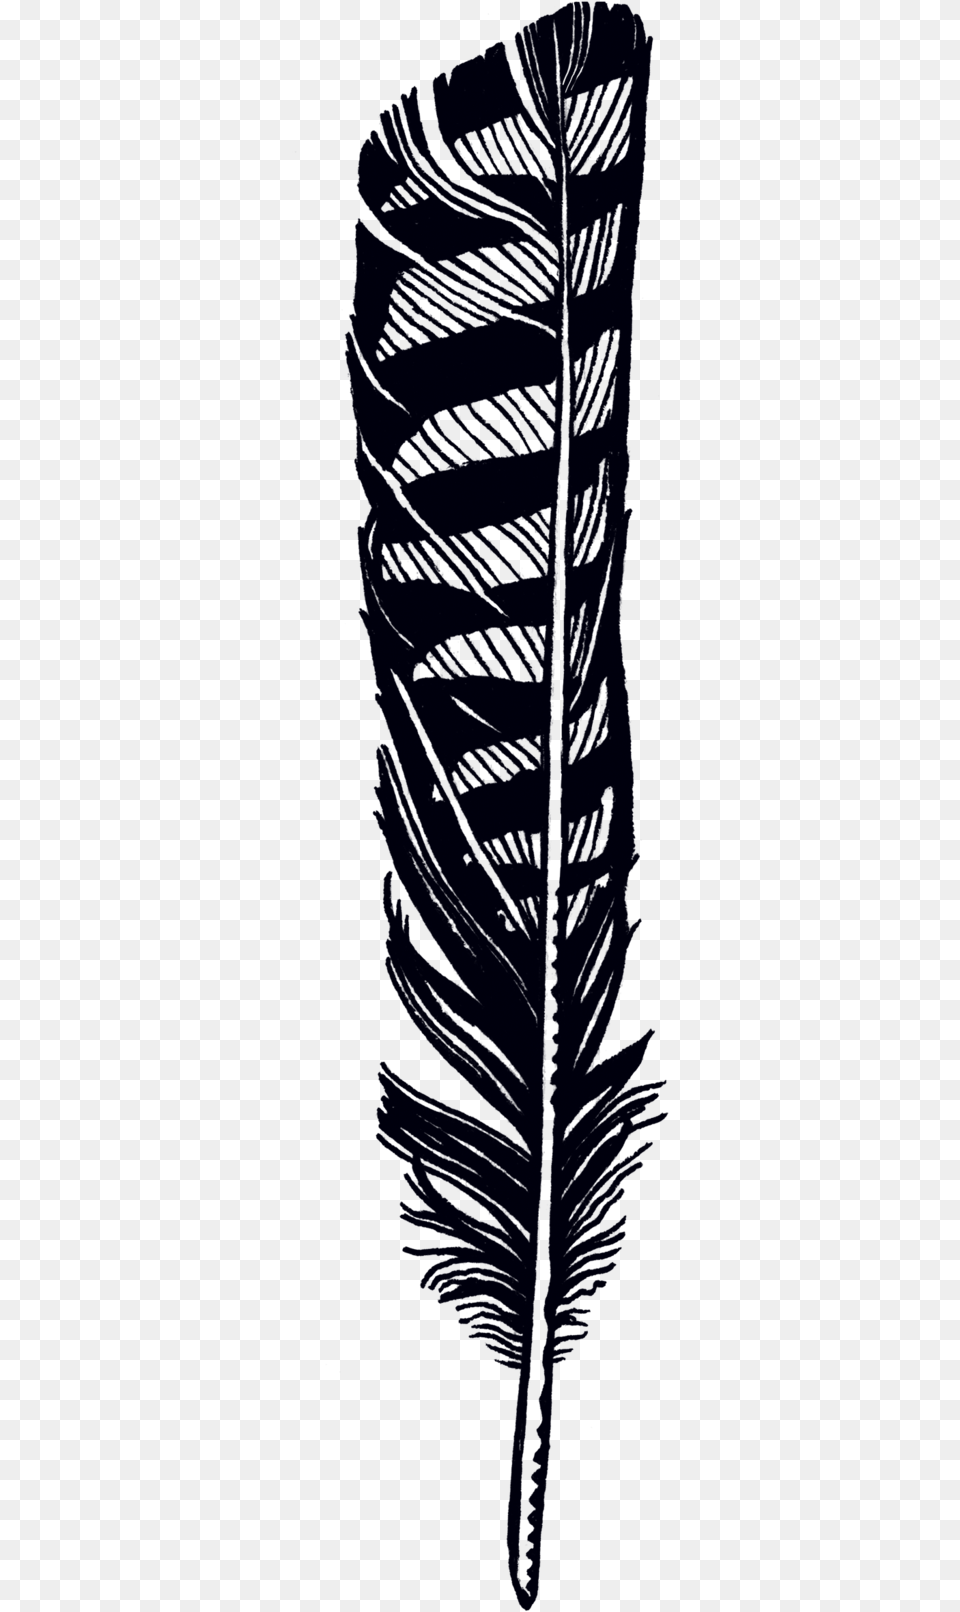 Hawk Feather Tattoo Designs, Brush, Device, Tool, Bottle Png Image